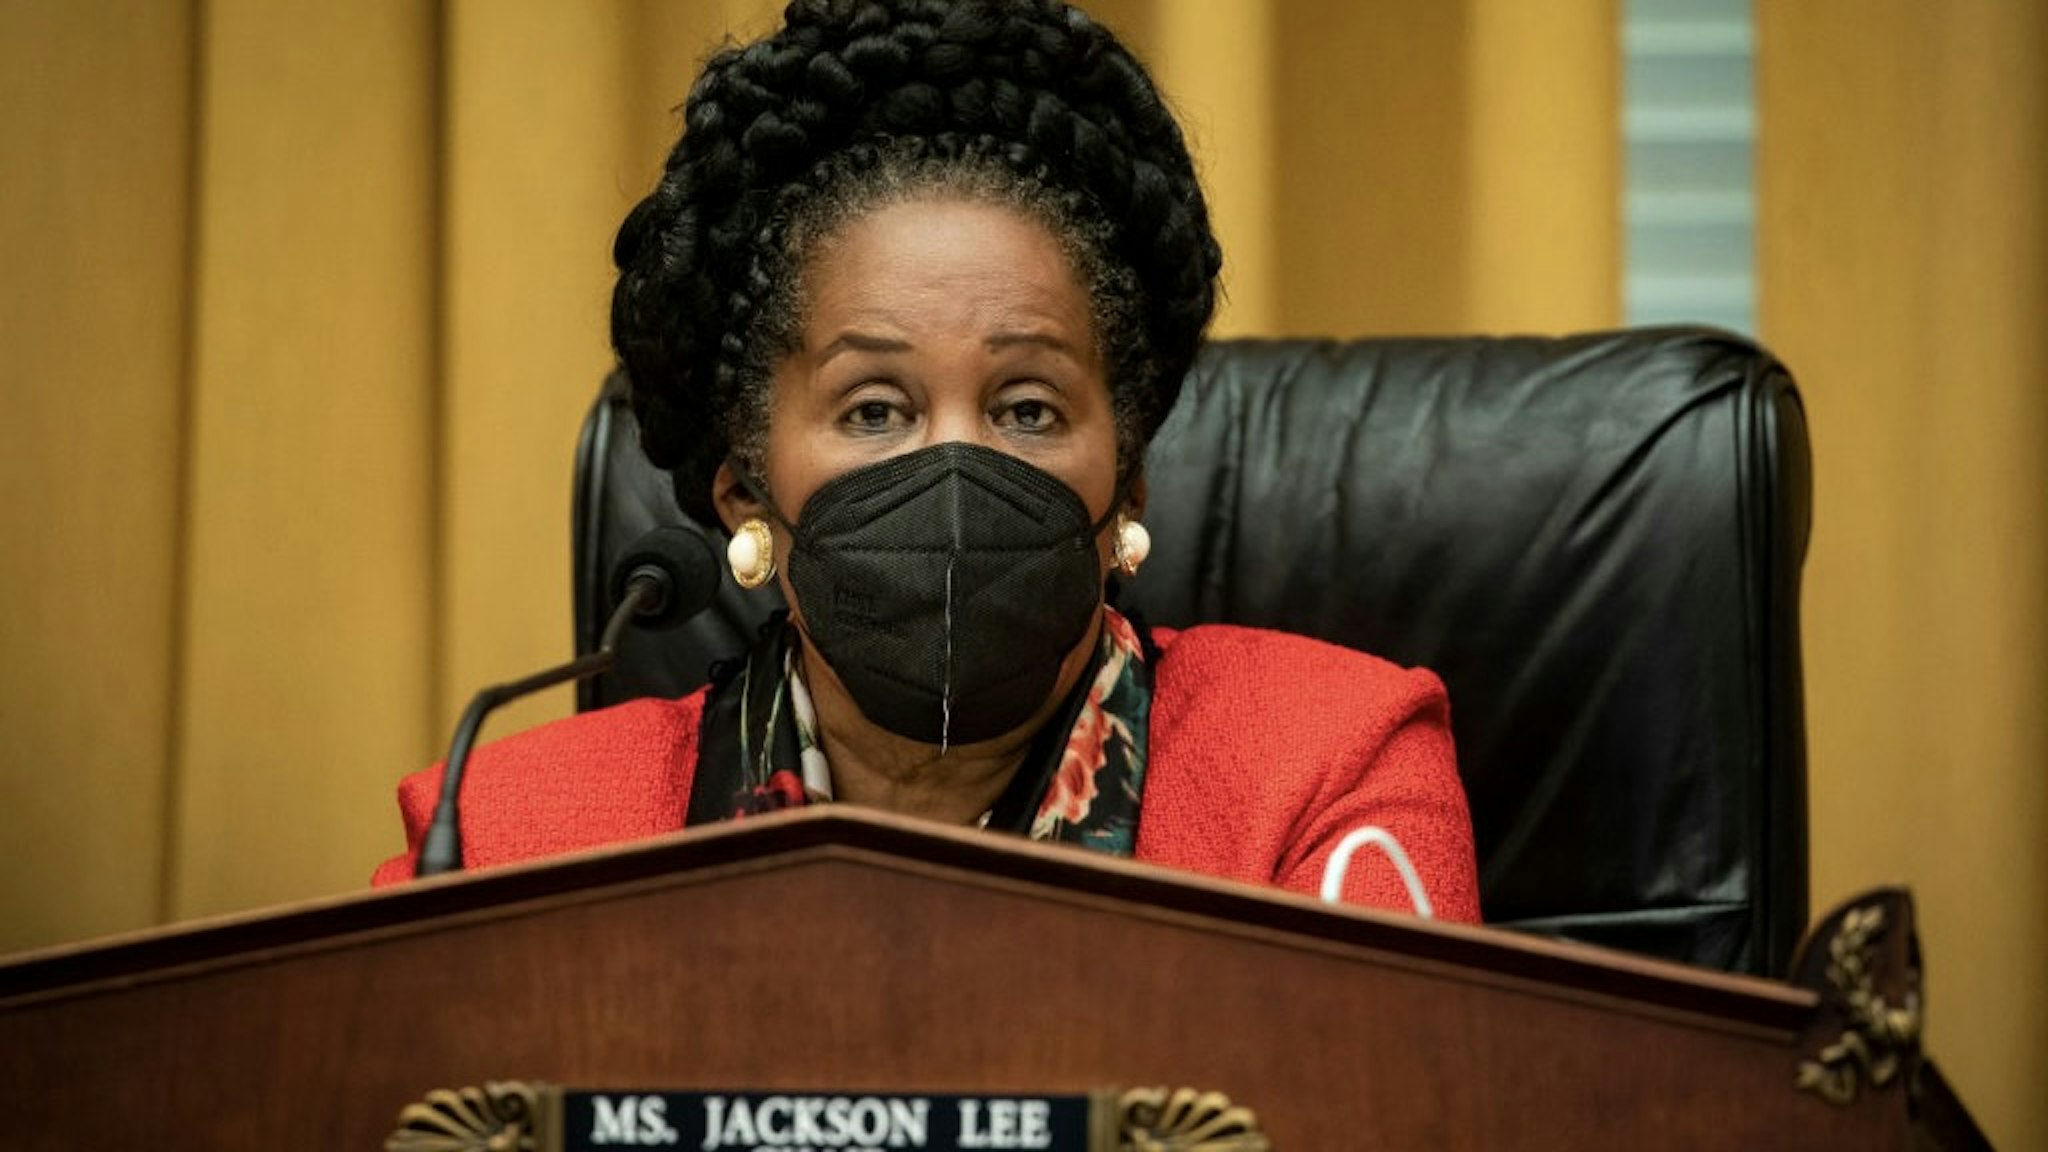 WASHINGTON, DC - FEBRUARY 24: Subcommittee chair Sheila Jackson Lee (D-TX) speaks during a House Judiciary subcommittee on Crime, Terrorism, and Homeland Security hearing, on Capitol Hill on February 24, 2021 in Washington, DC. (Photo by Al Drago/Getty Images)